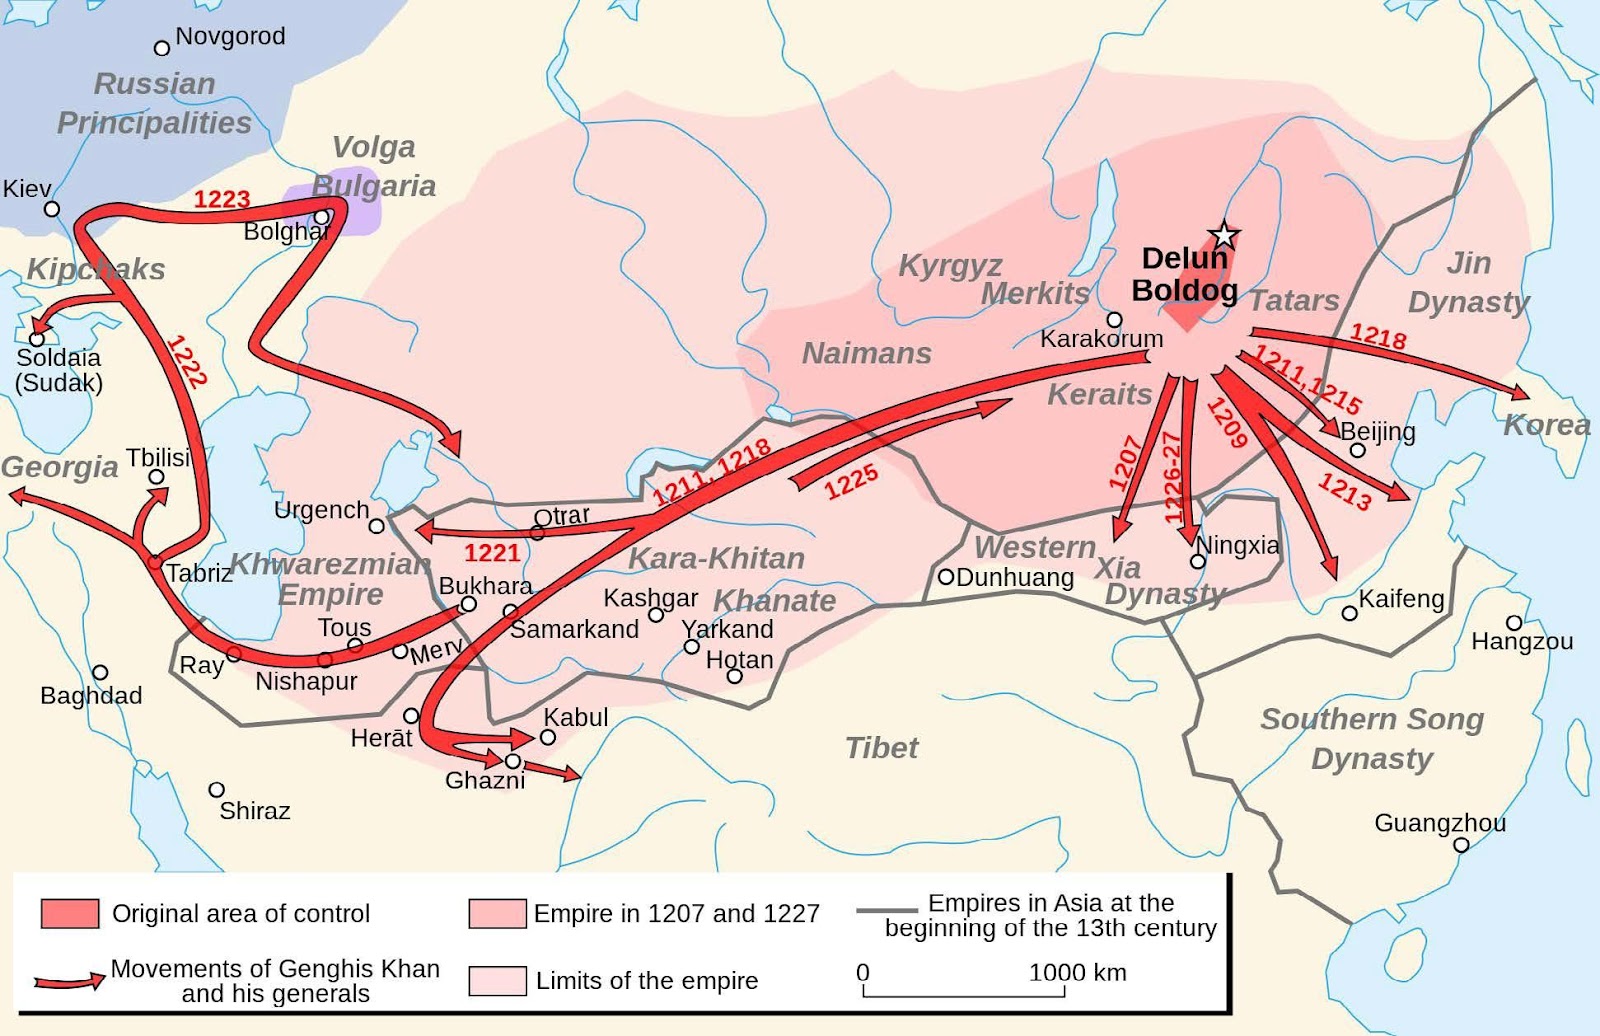 Map of Mongol Empire as it expanded during the first waves of conquests, from 1207-1225